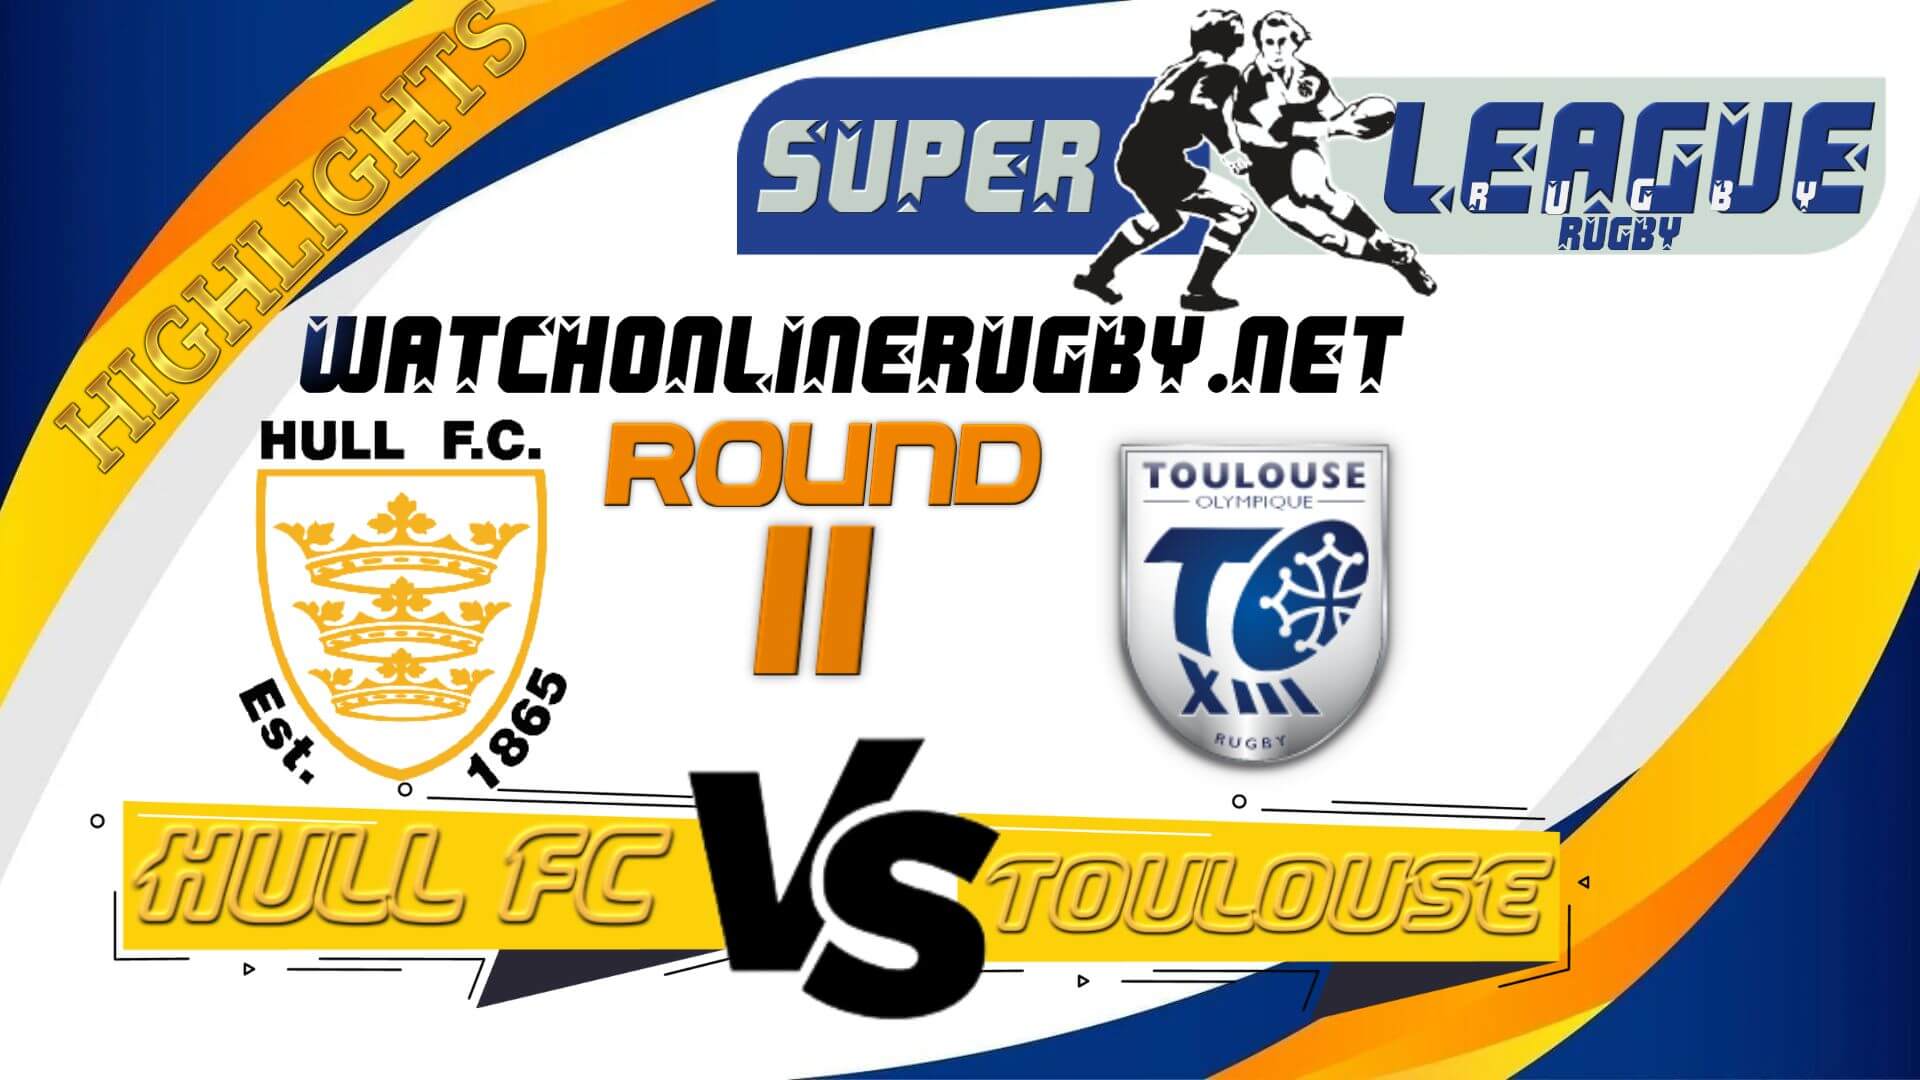 Hull FC Vs Toulouse Super League Rugby 2022 RD 11